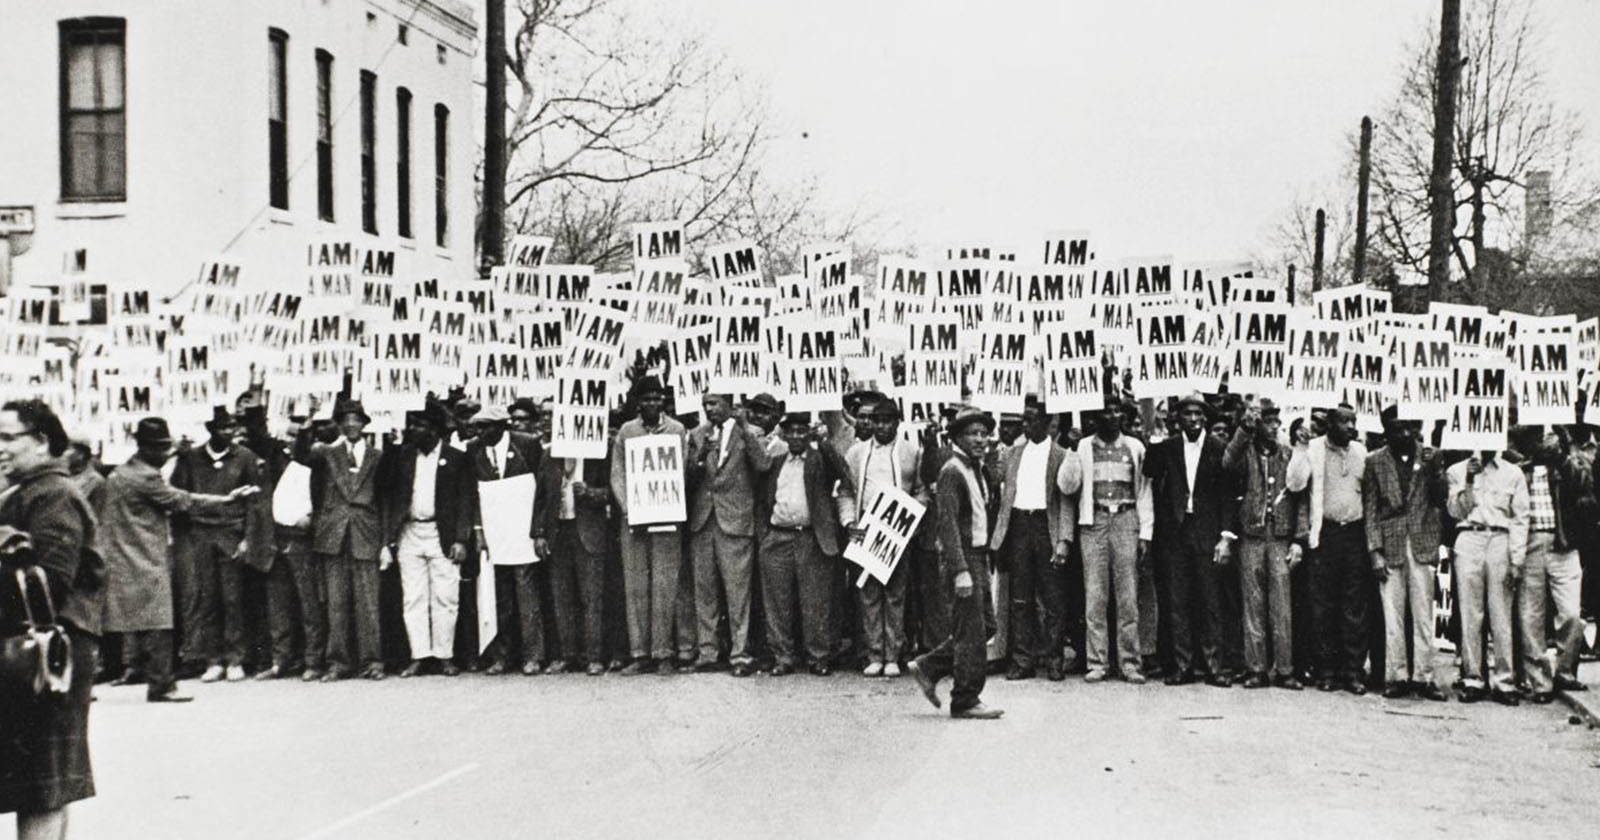 Documentary Explores Civil Rights Photographer Who Was on FBI Payroll